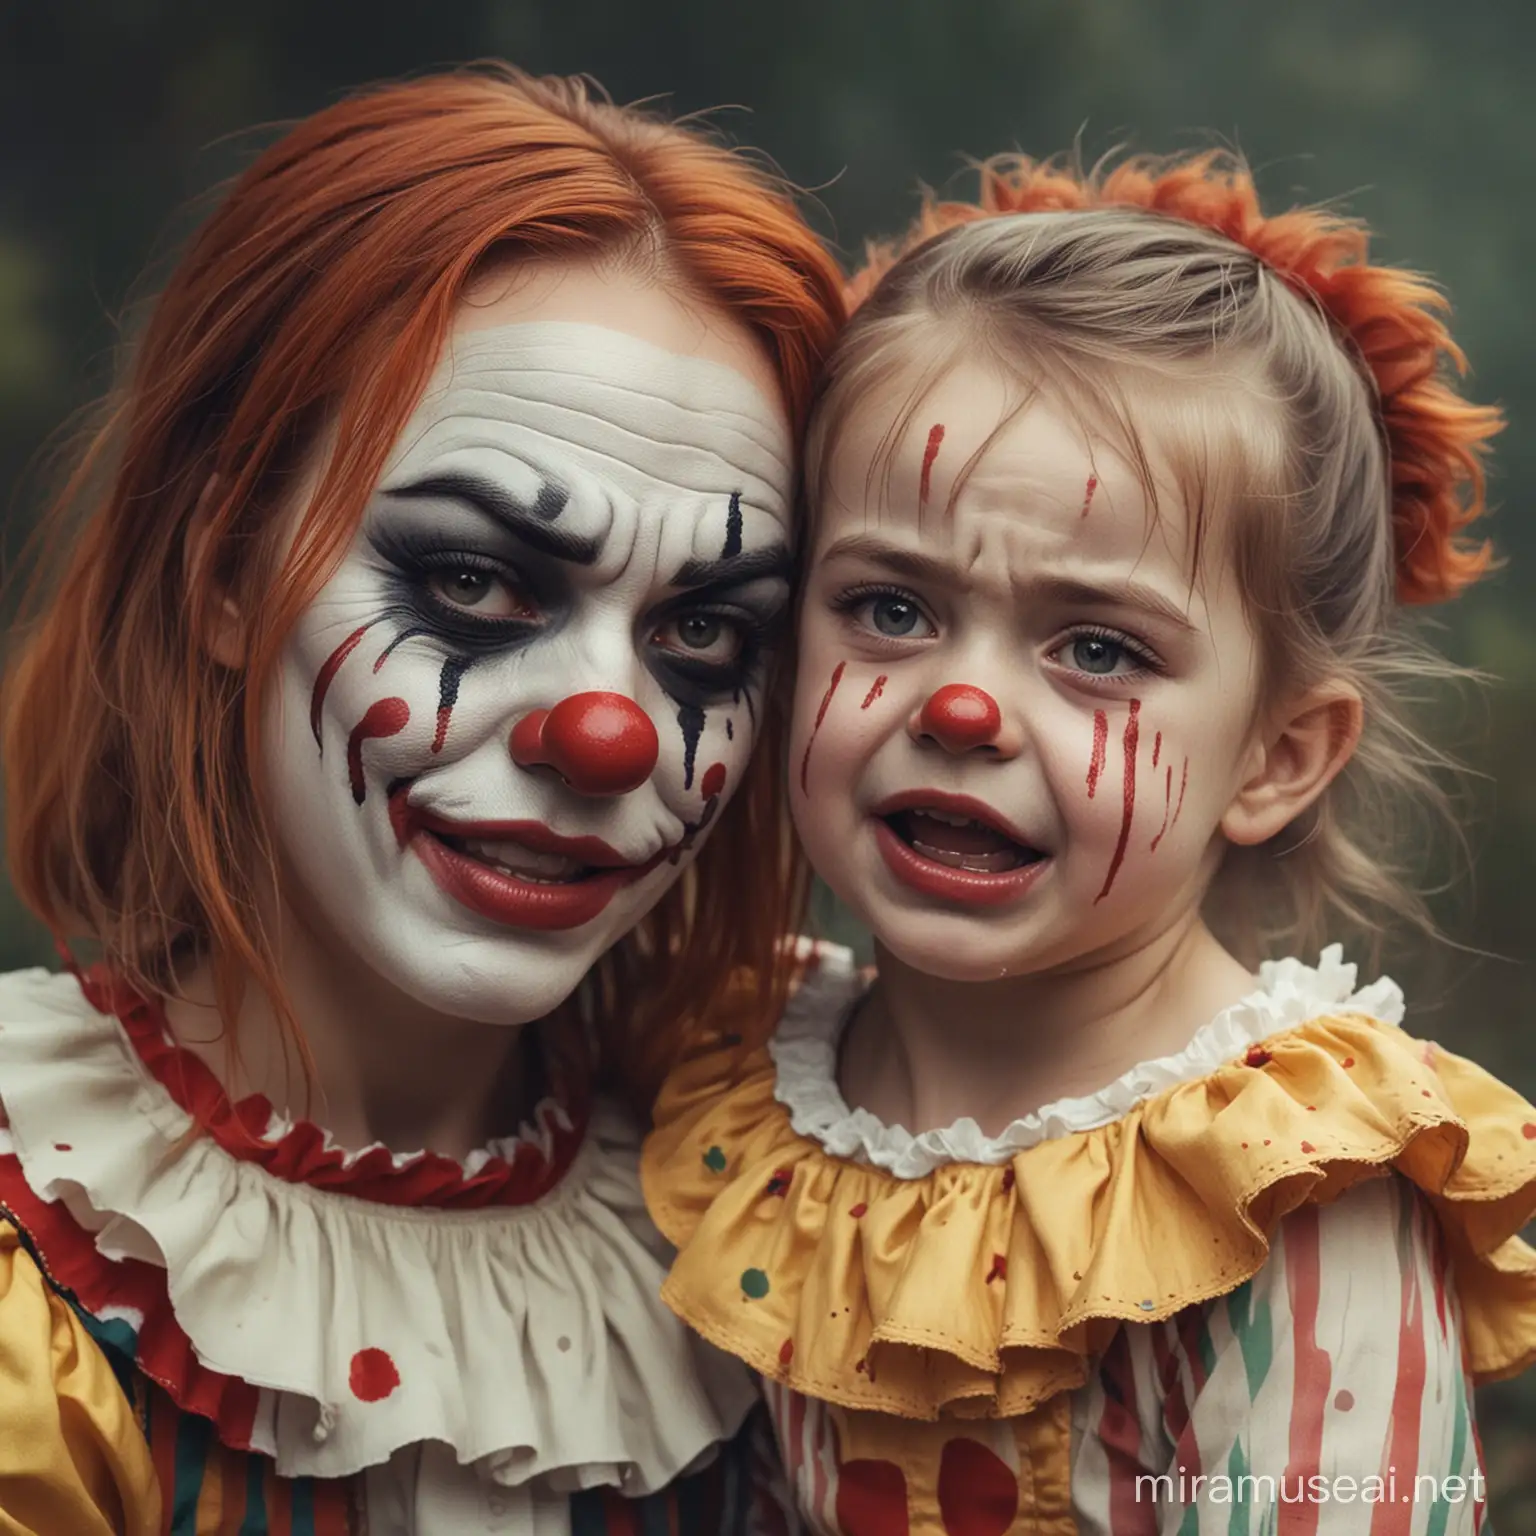 Distressed Little Girl with Sinister Clown